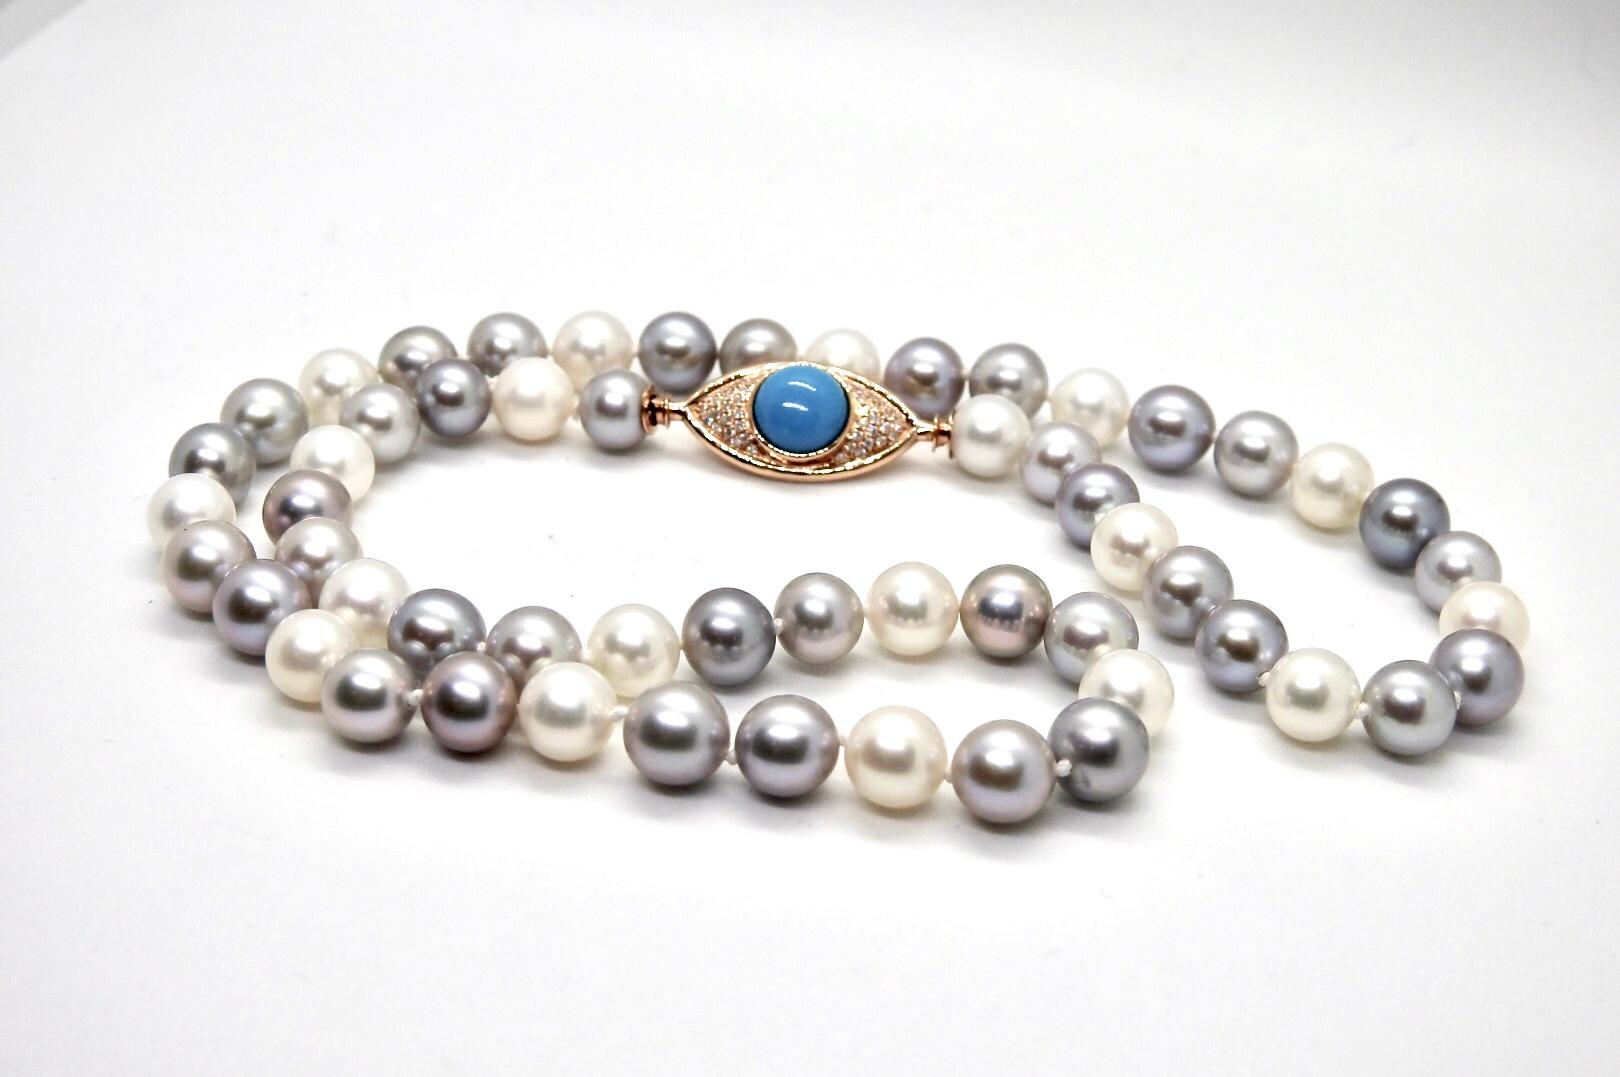 ARGOS necklace is a strand of  8mm cultured pearls, with 18K rose gold 